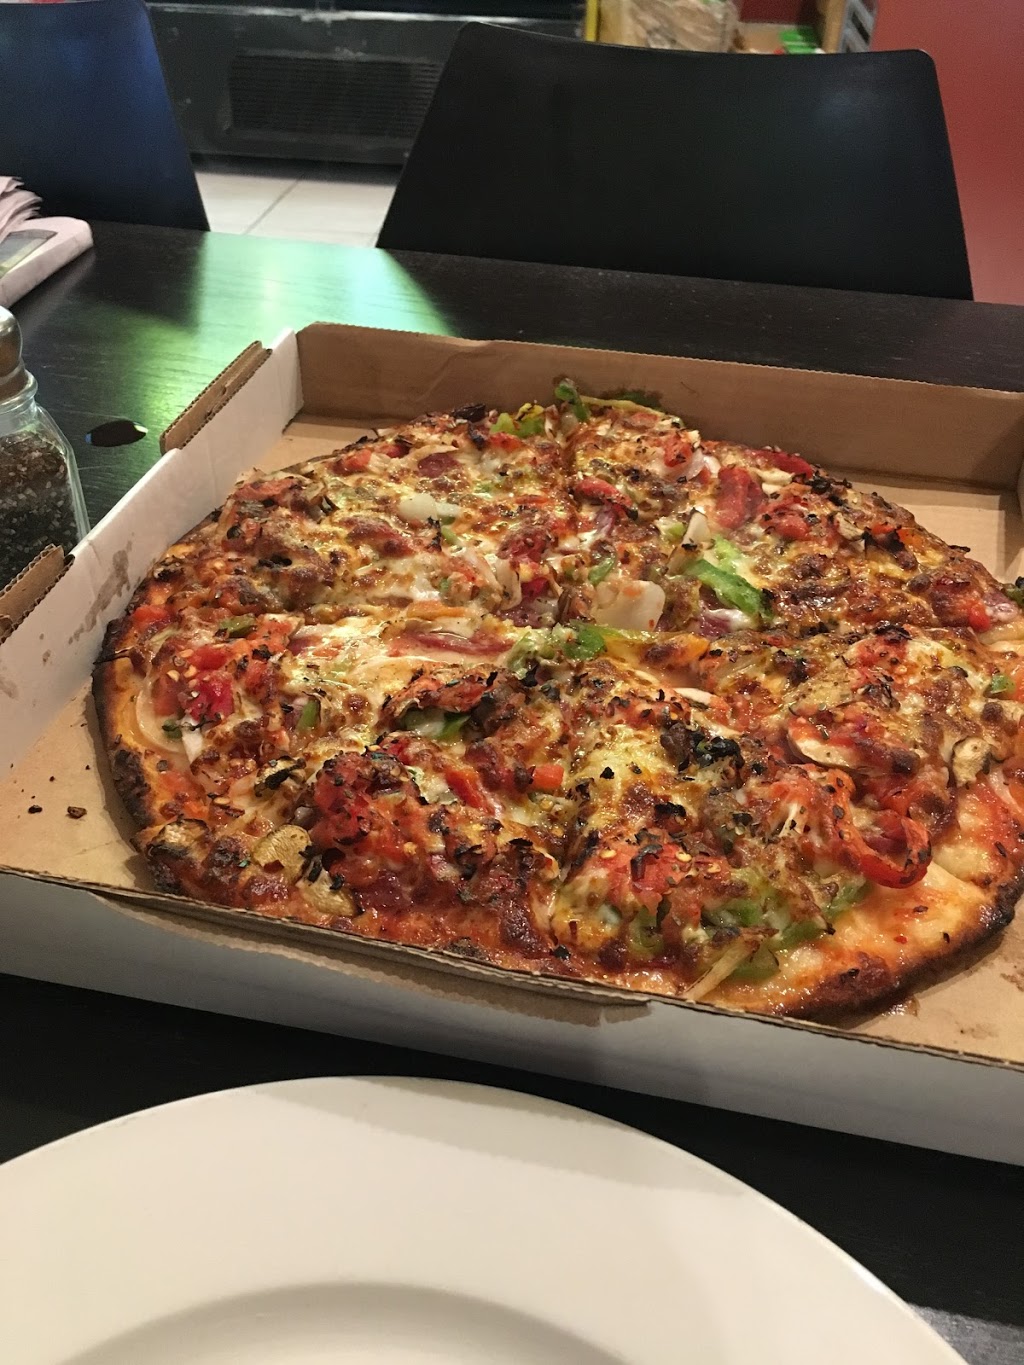 Red Tomato Pizza and pasta | meal delivery | 175B Somerville Rd, Yarraville VIC 3013, Australia | 0393251120 OR +61 3 9325 1120